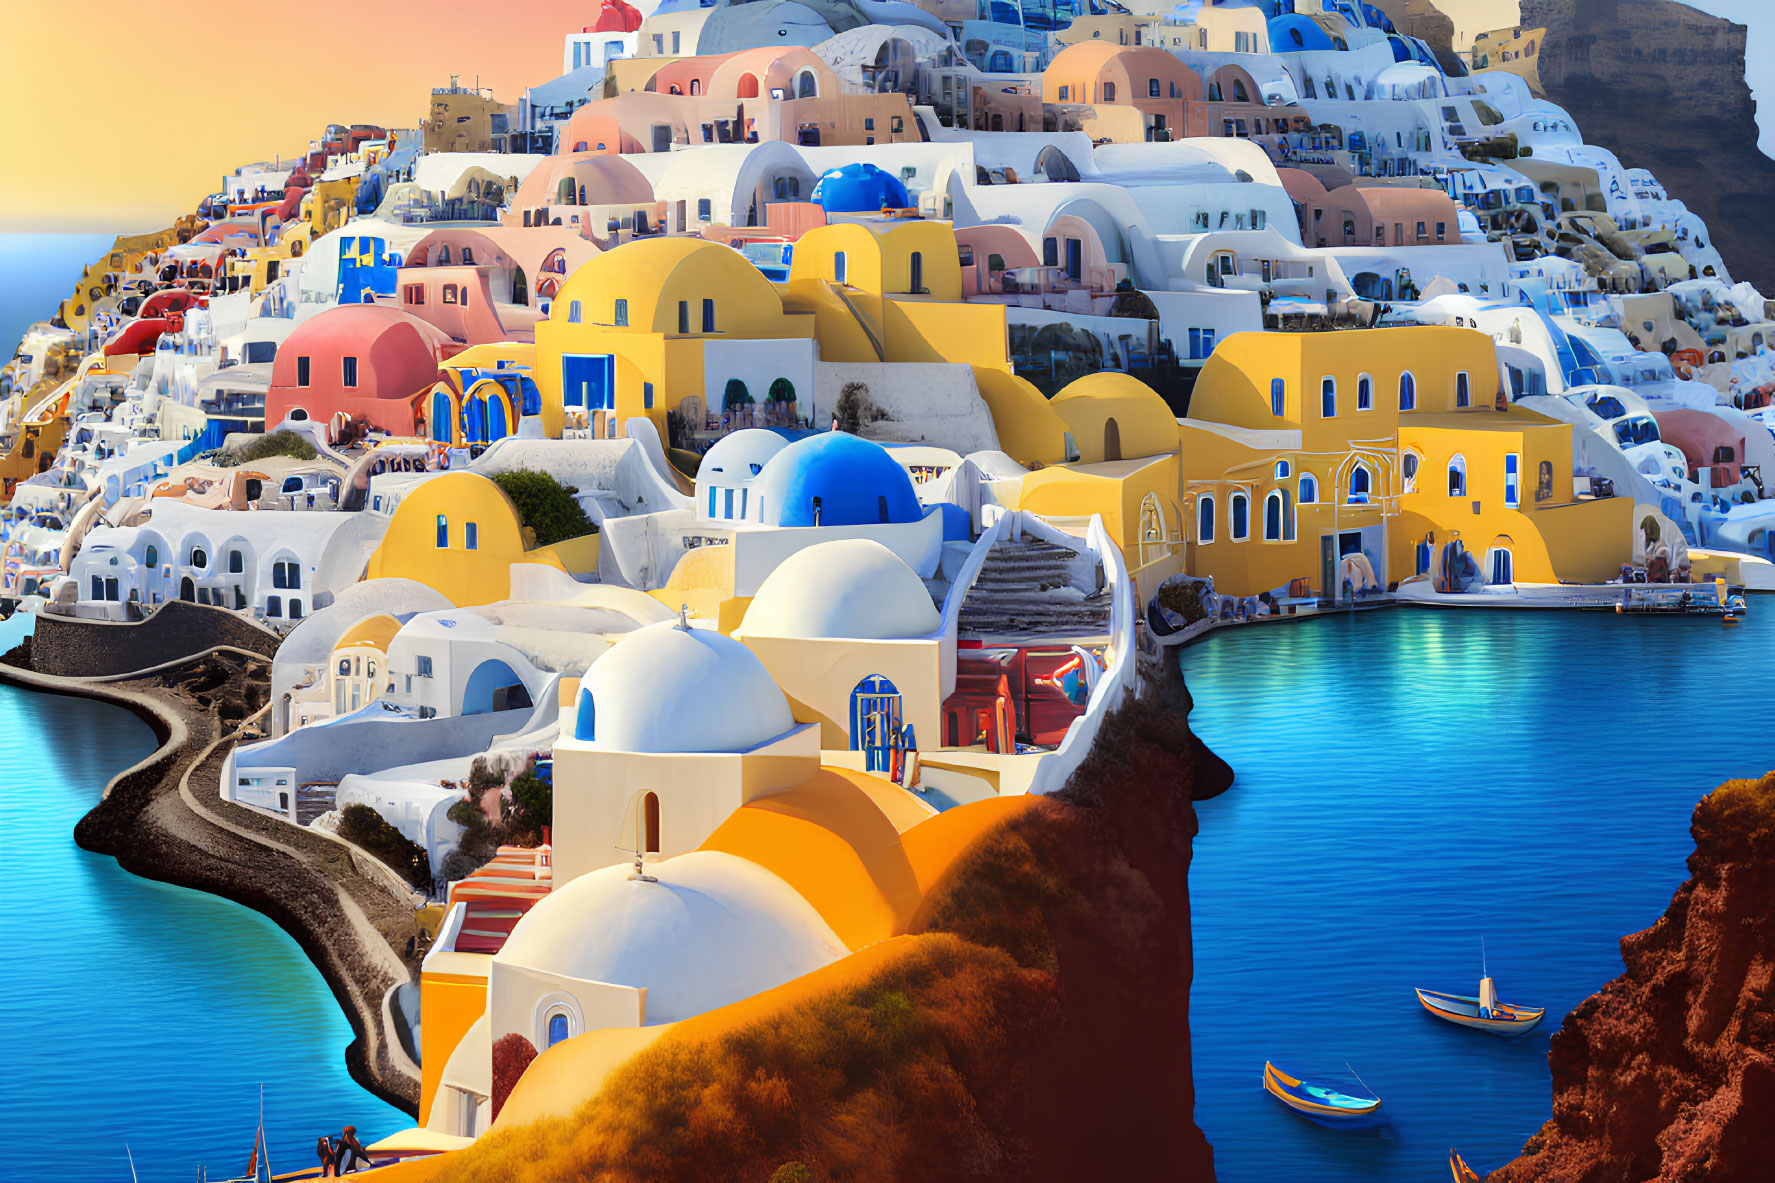 Colorful Buildings with Blue Domes Overlooking Serene Sea at Sunset